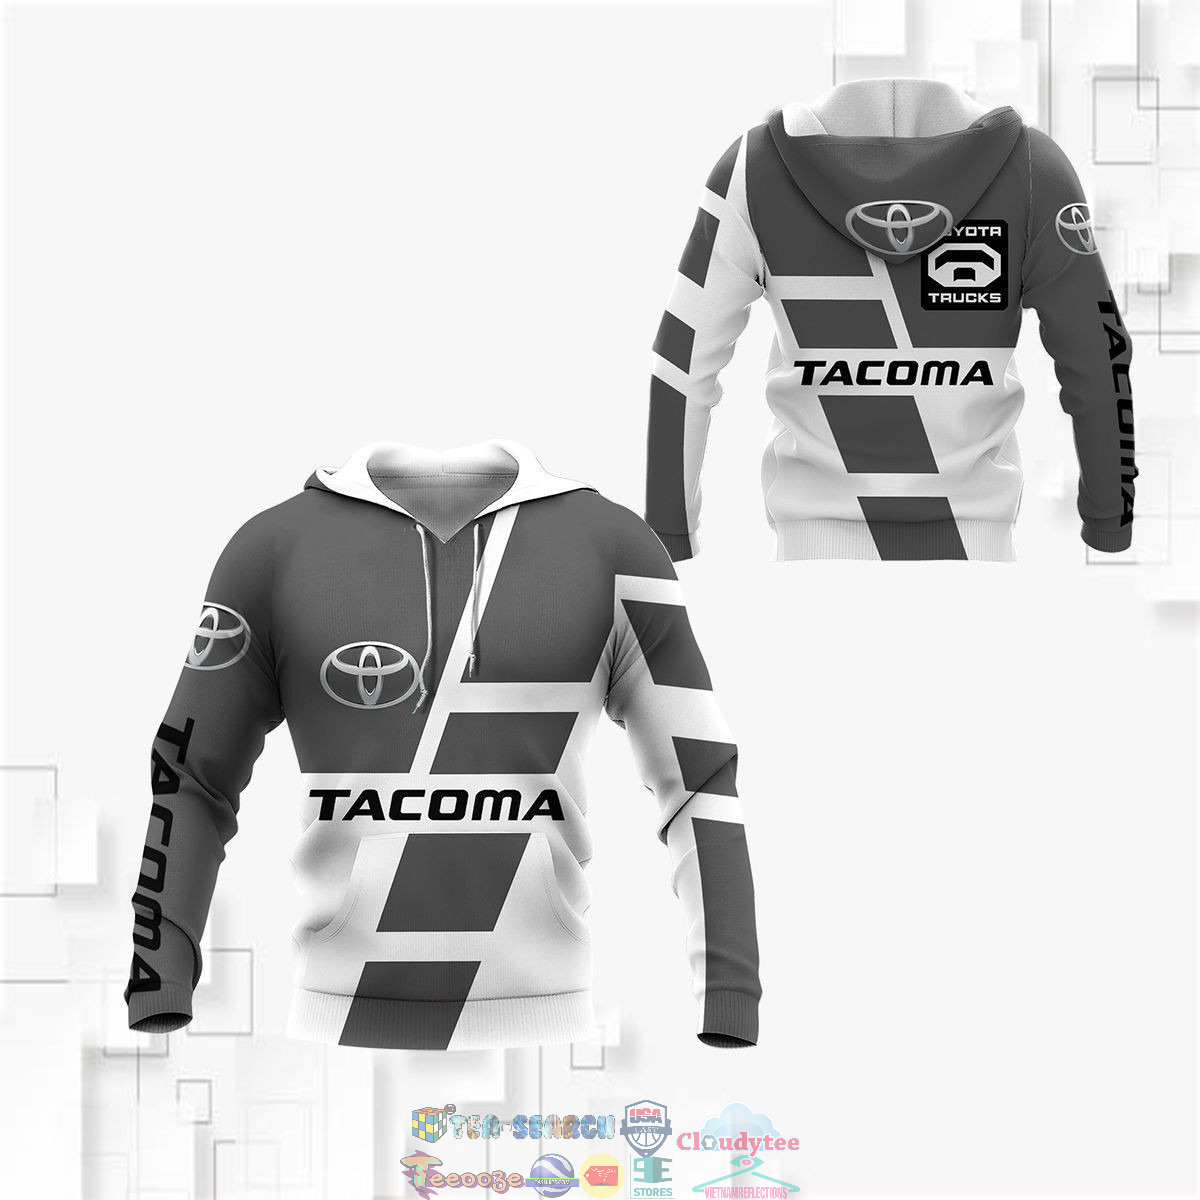 Toyota Tacoma ver 6 3D hoodie and t-shirt